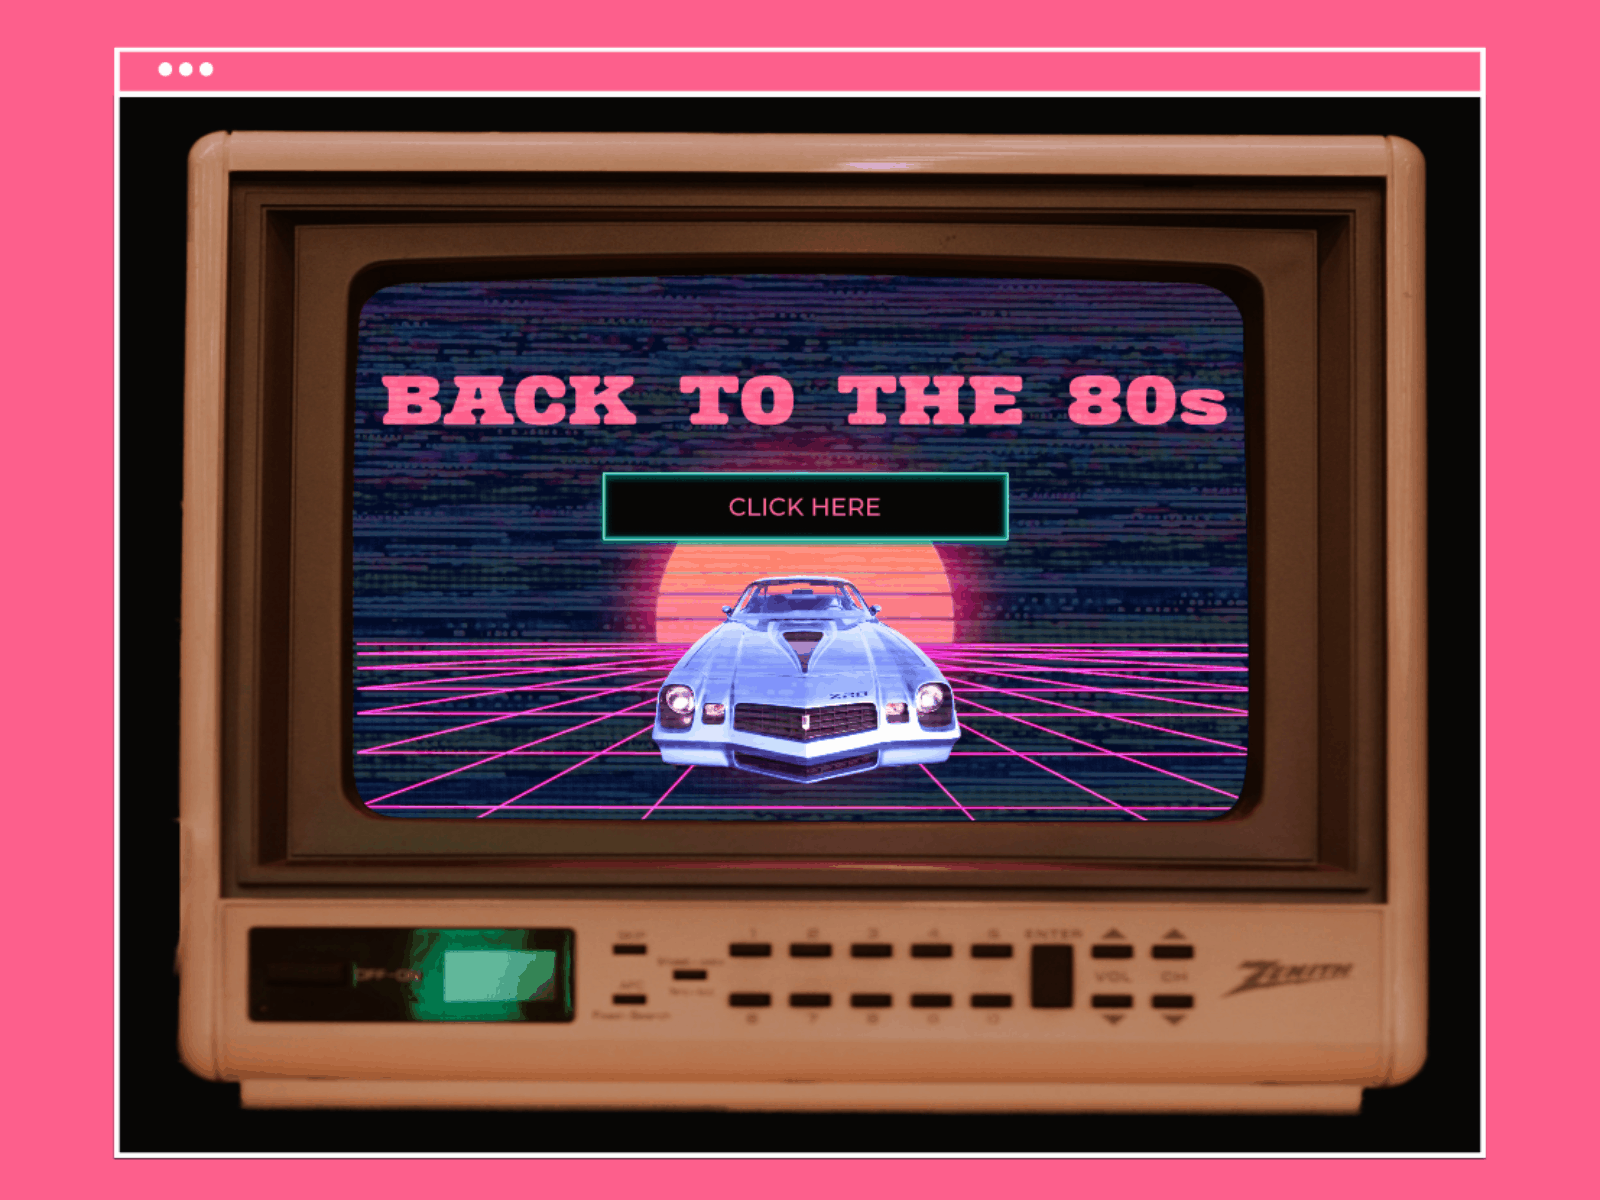 BACK TO THE 80s. Landing page for Retro concept.